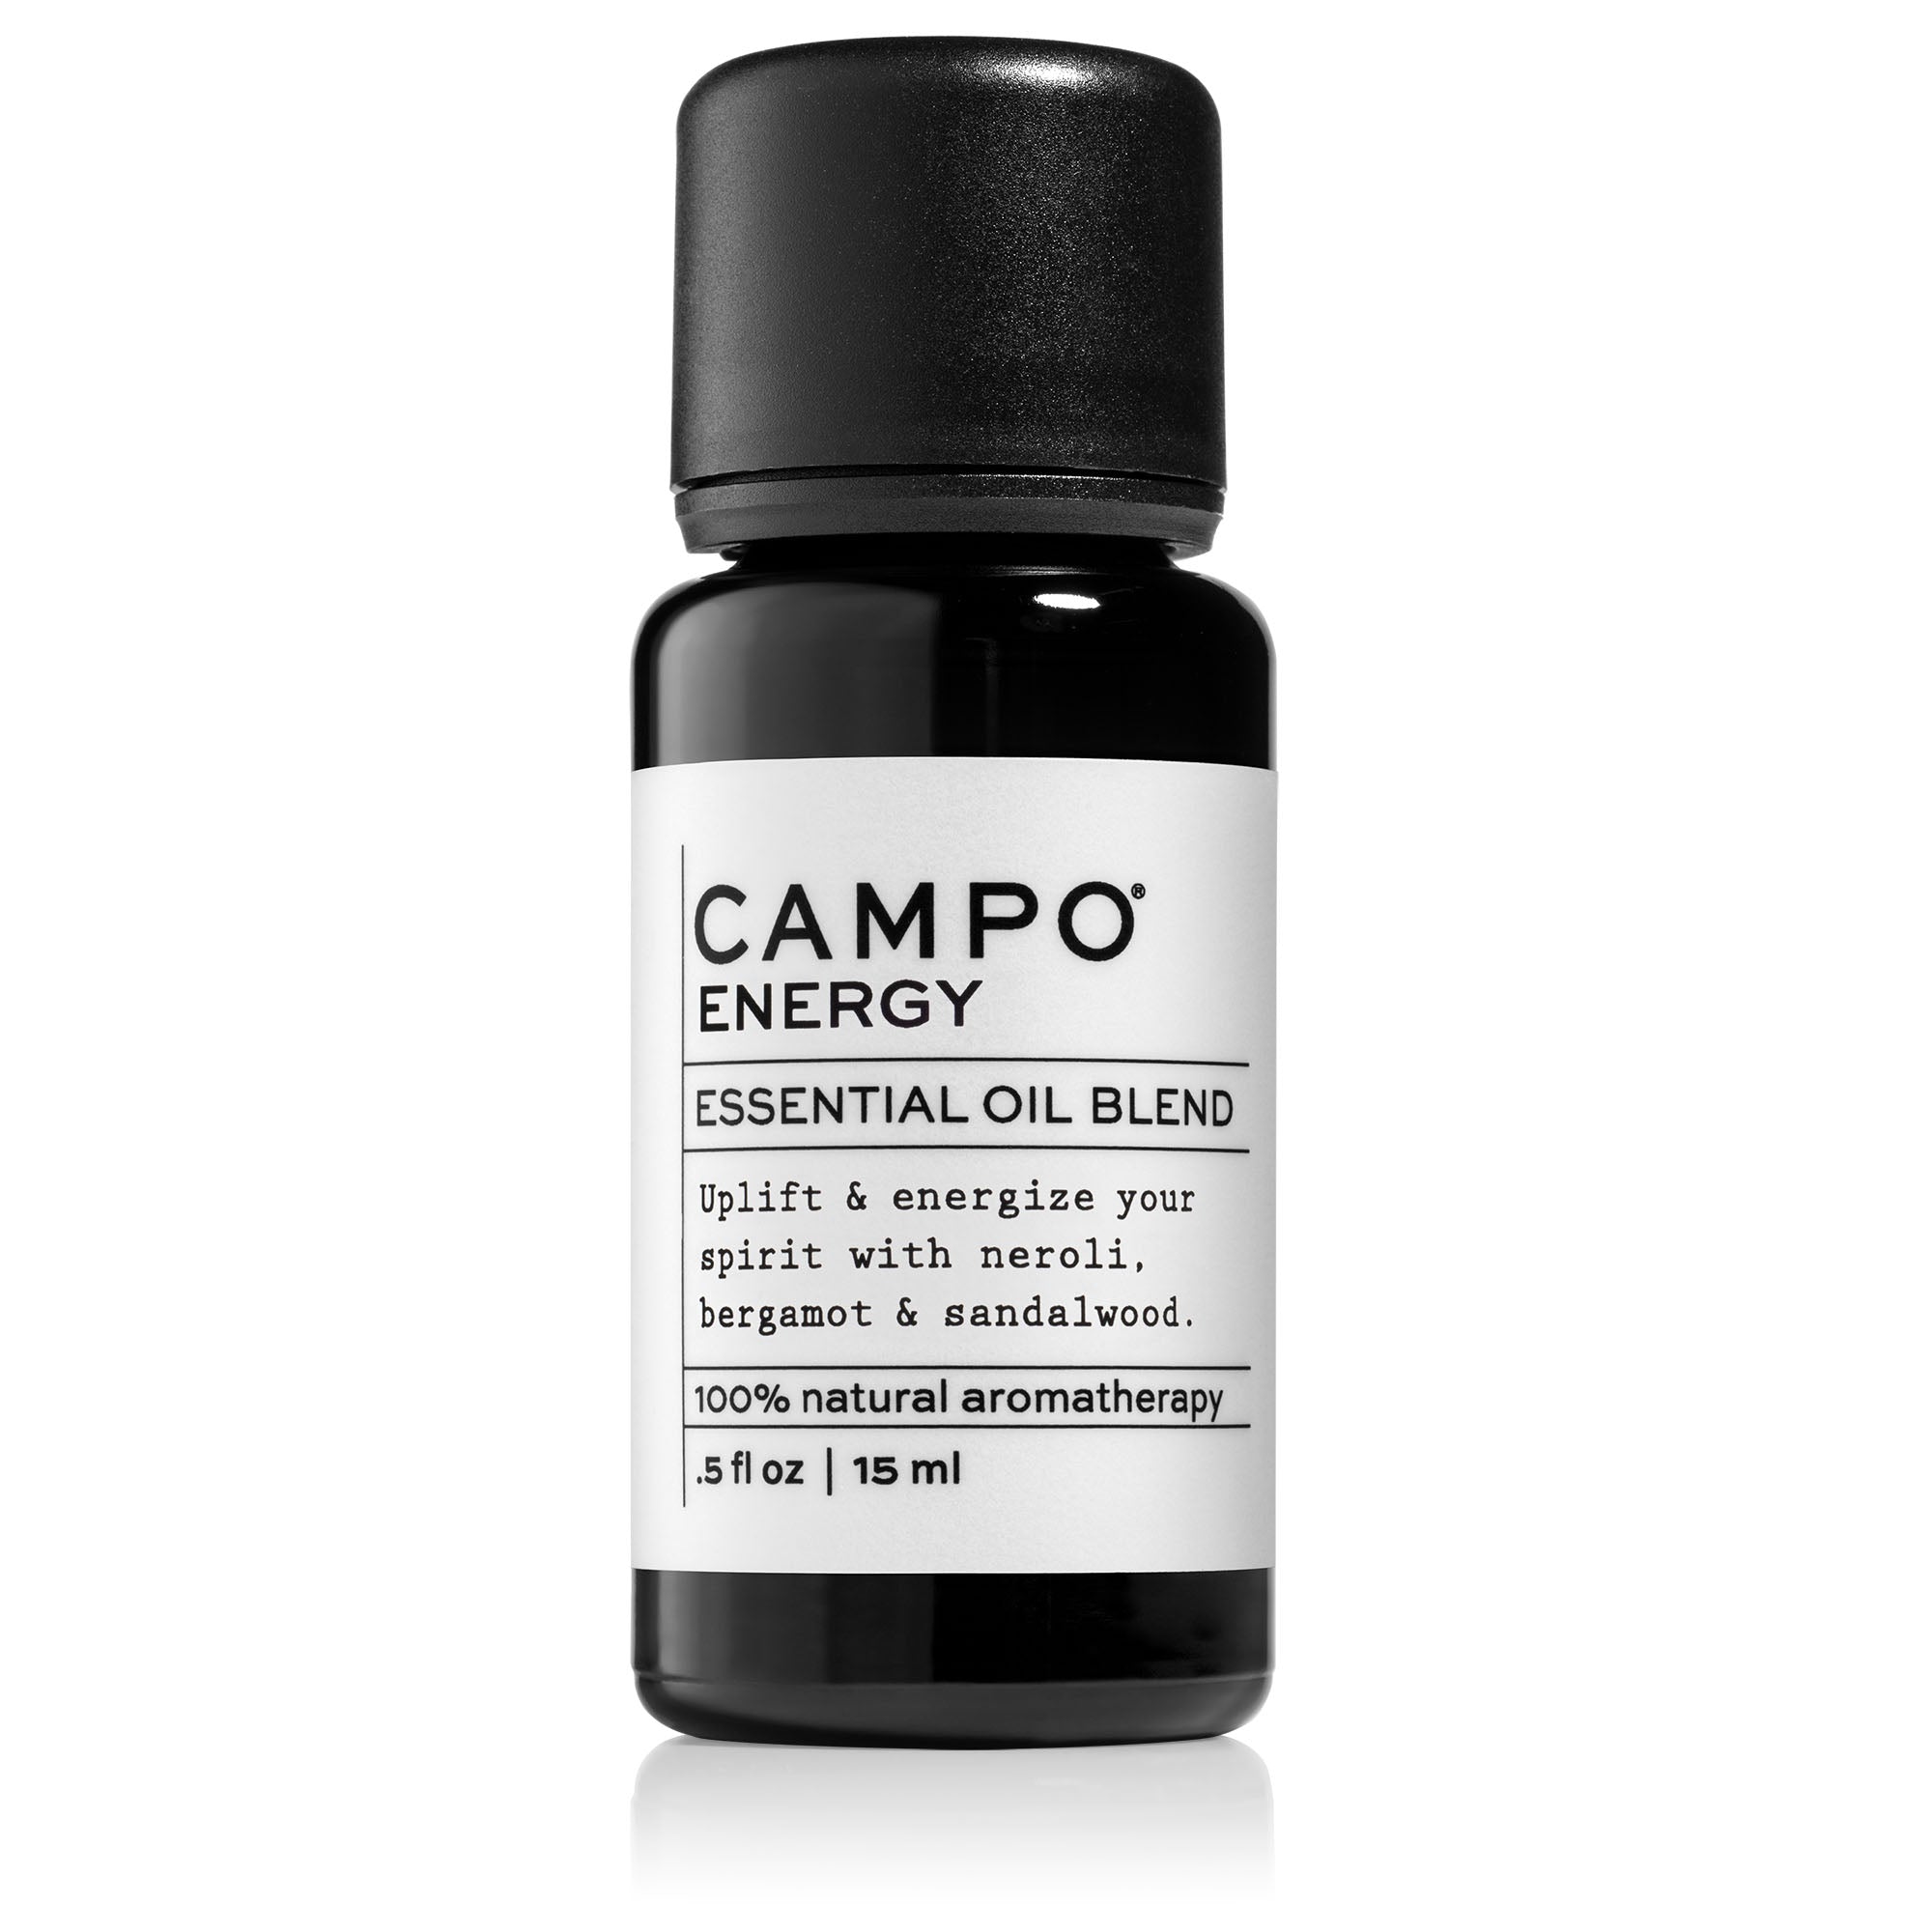 Campo Beauty ENERGY Blend 15 ml Essential Oil. Restores a sense of vitality and alertness. An uplifting blend of 100% pure essential oils with rich citrus notes of Italian Neroli Orange Blossom, Bergamot, Sweet Orange, and Bitter Orange with a hint of Australian Sandalwood. Feel the energy inside and out.